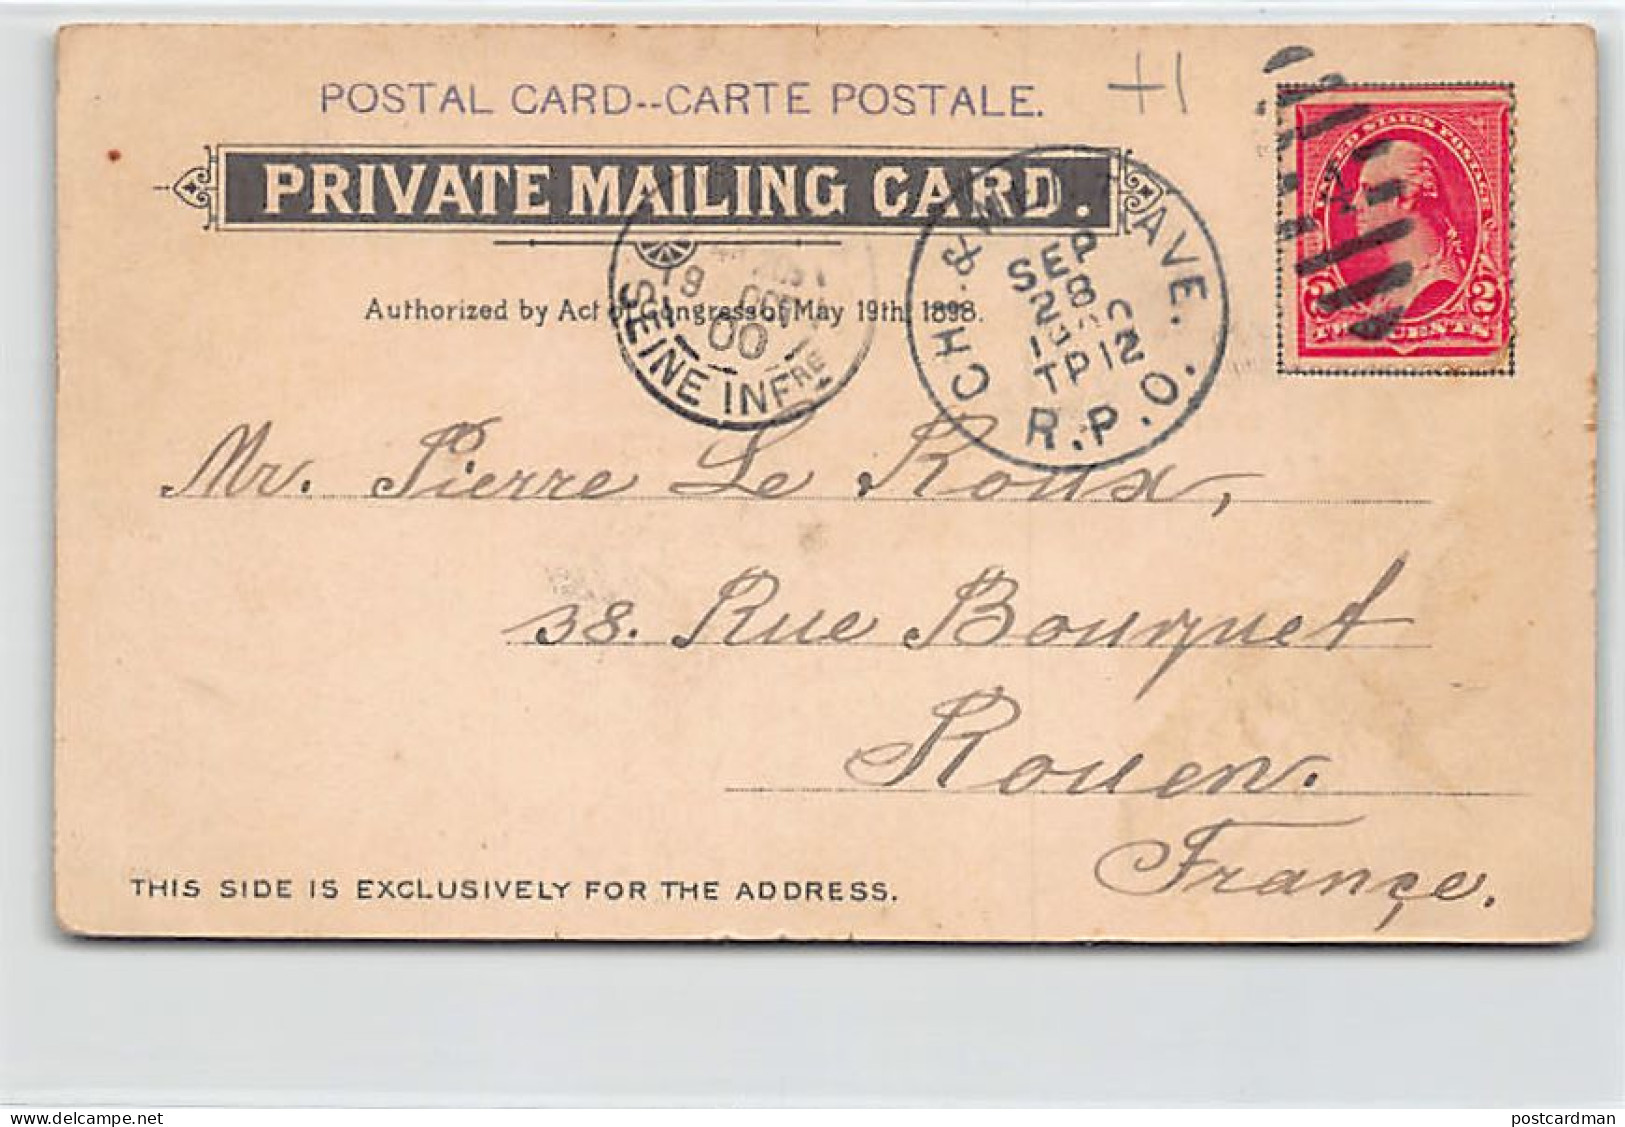 Usa - CHICAGO (IL) LITHO - Lincoln Park - Publ. E.C. Kropp 3 - PRIVATE MAILING CARD - Chicago